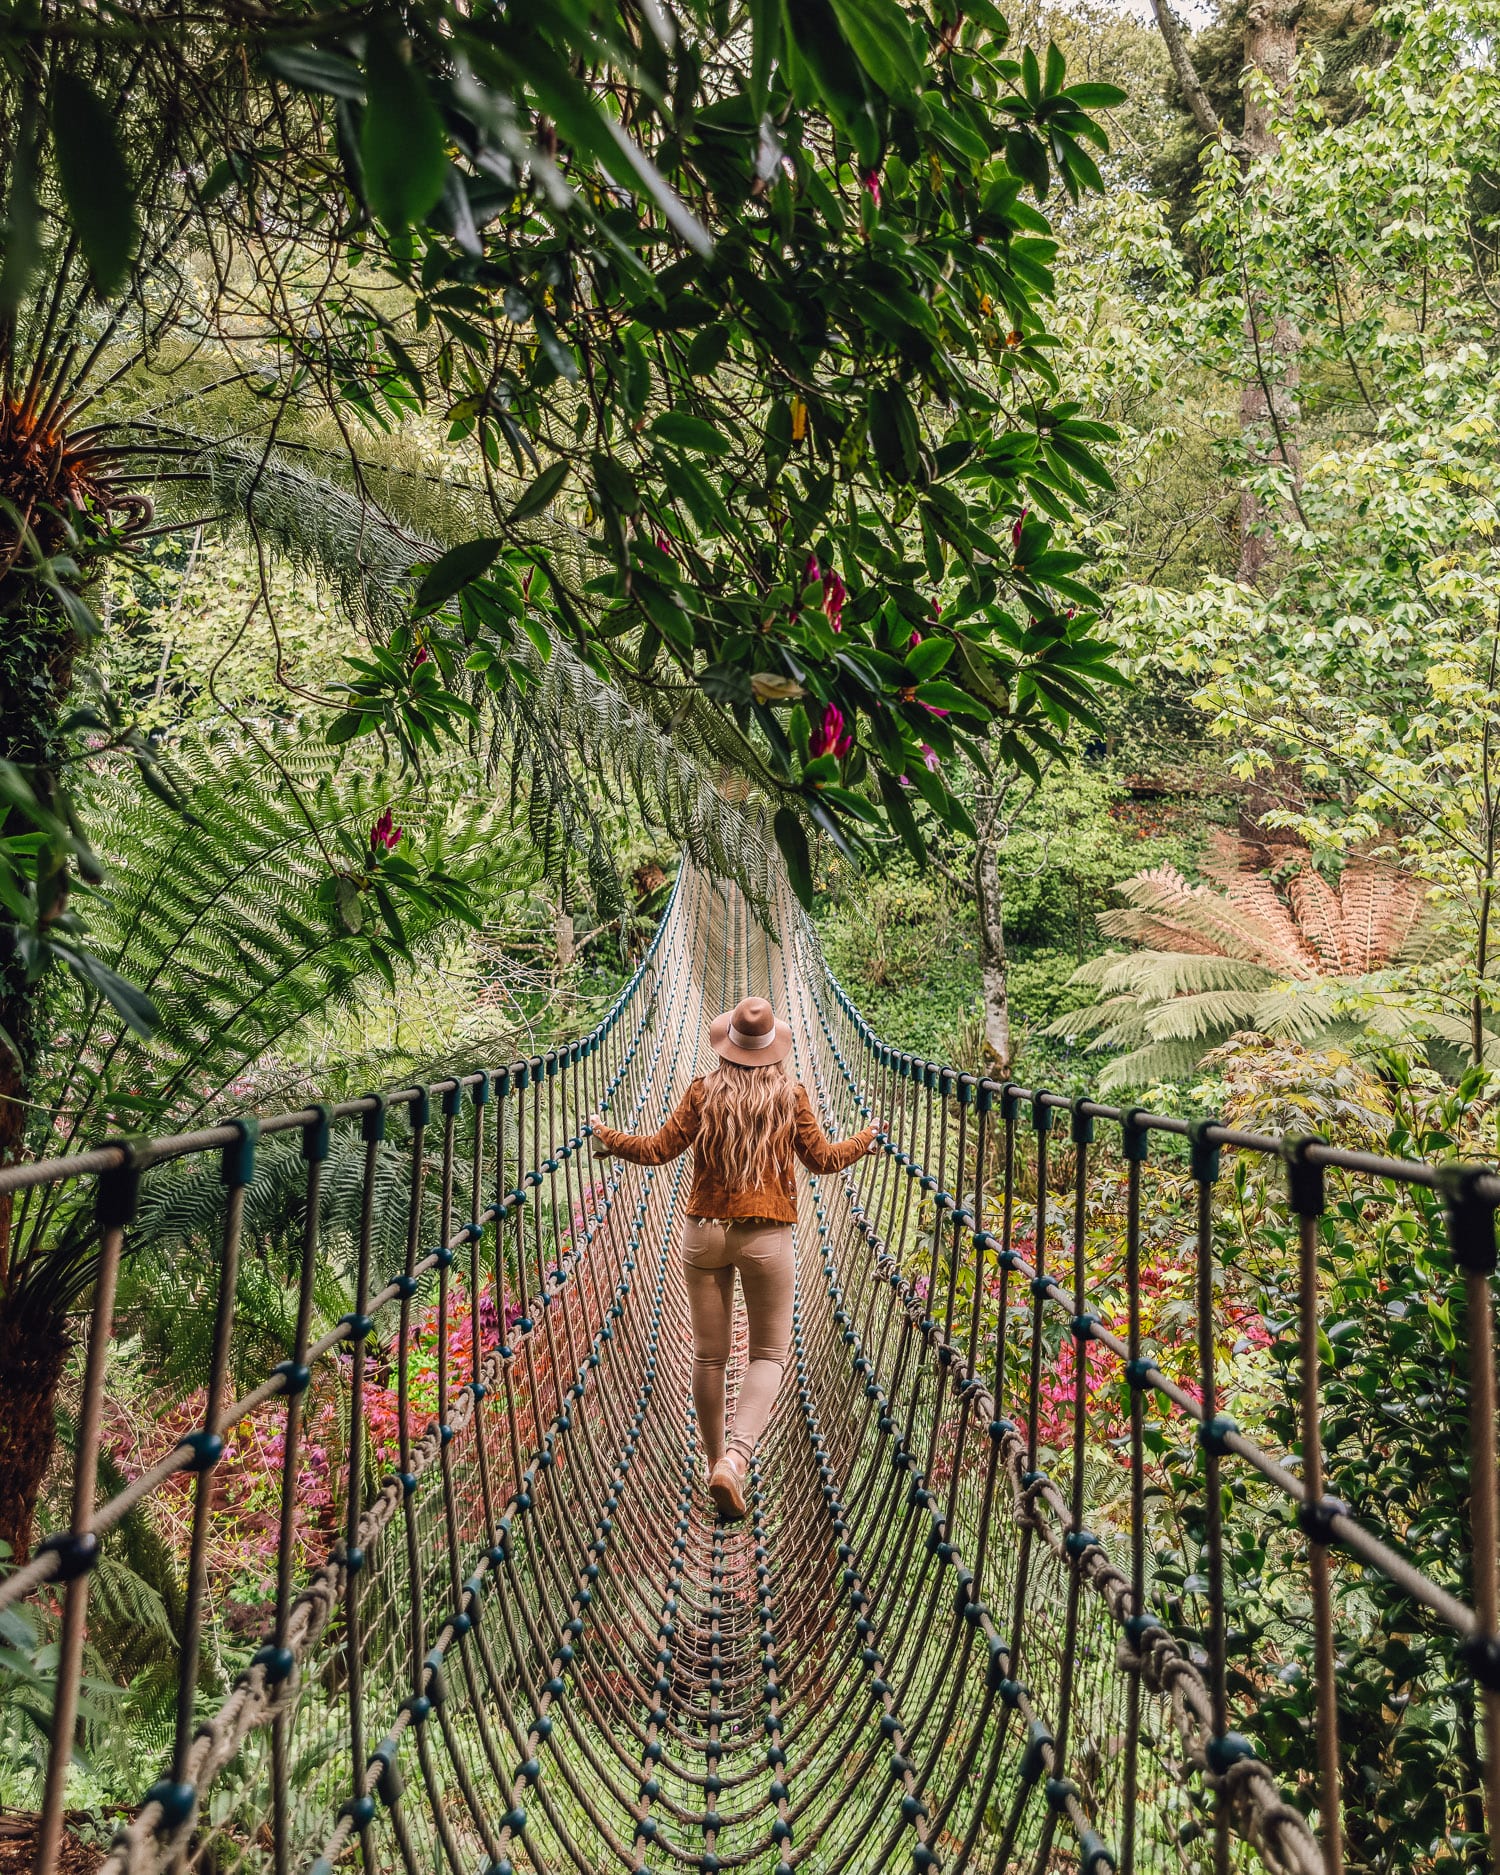 Burma Rope Bridge in The Lost Gardens of Heligan | Most Instagrammable Places in Cornwall, UK